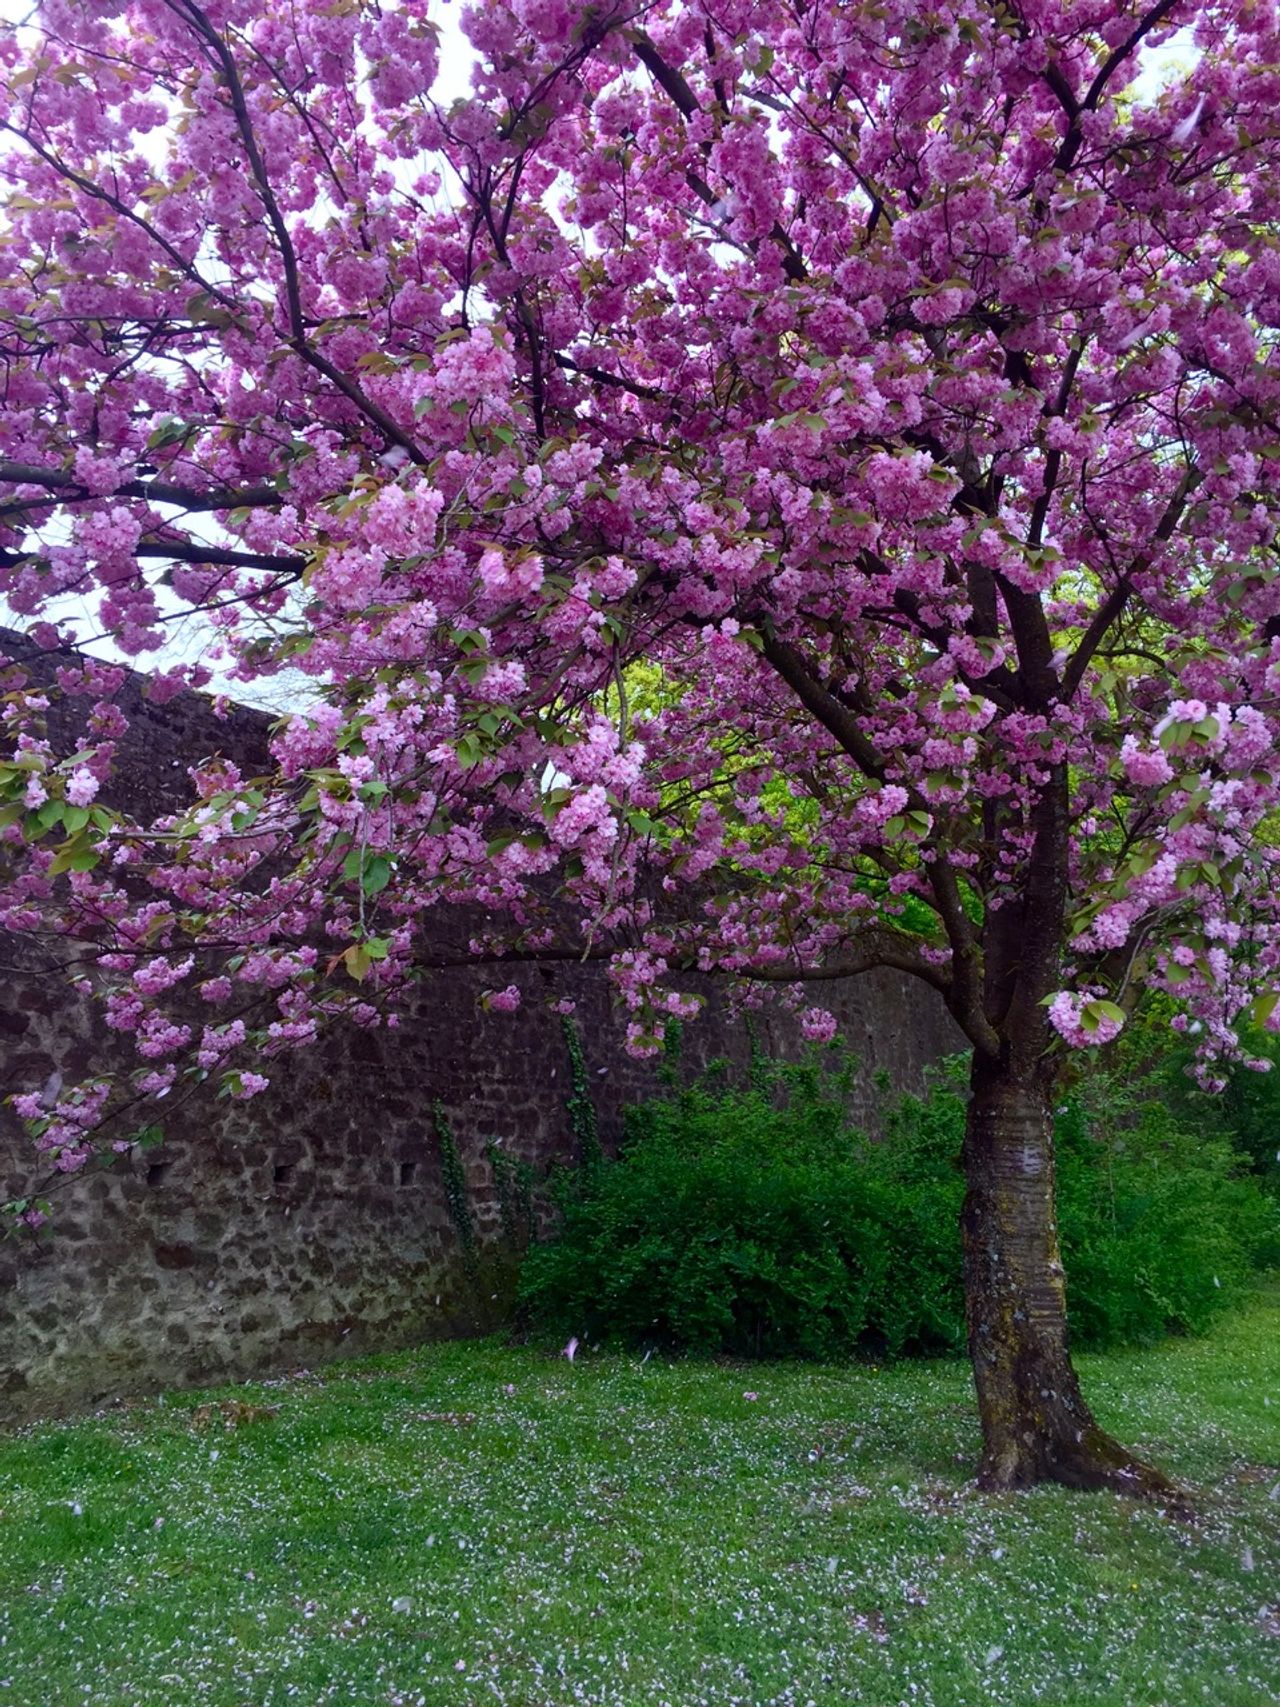 A tree with bright purple flowers.